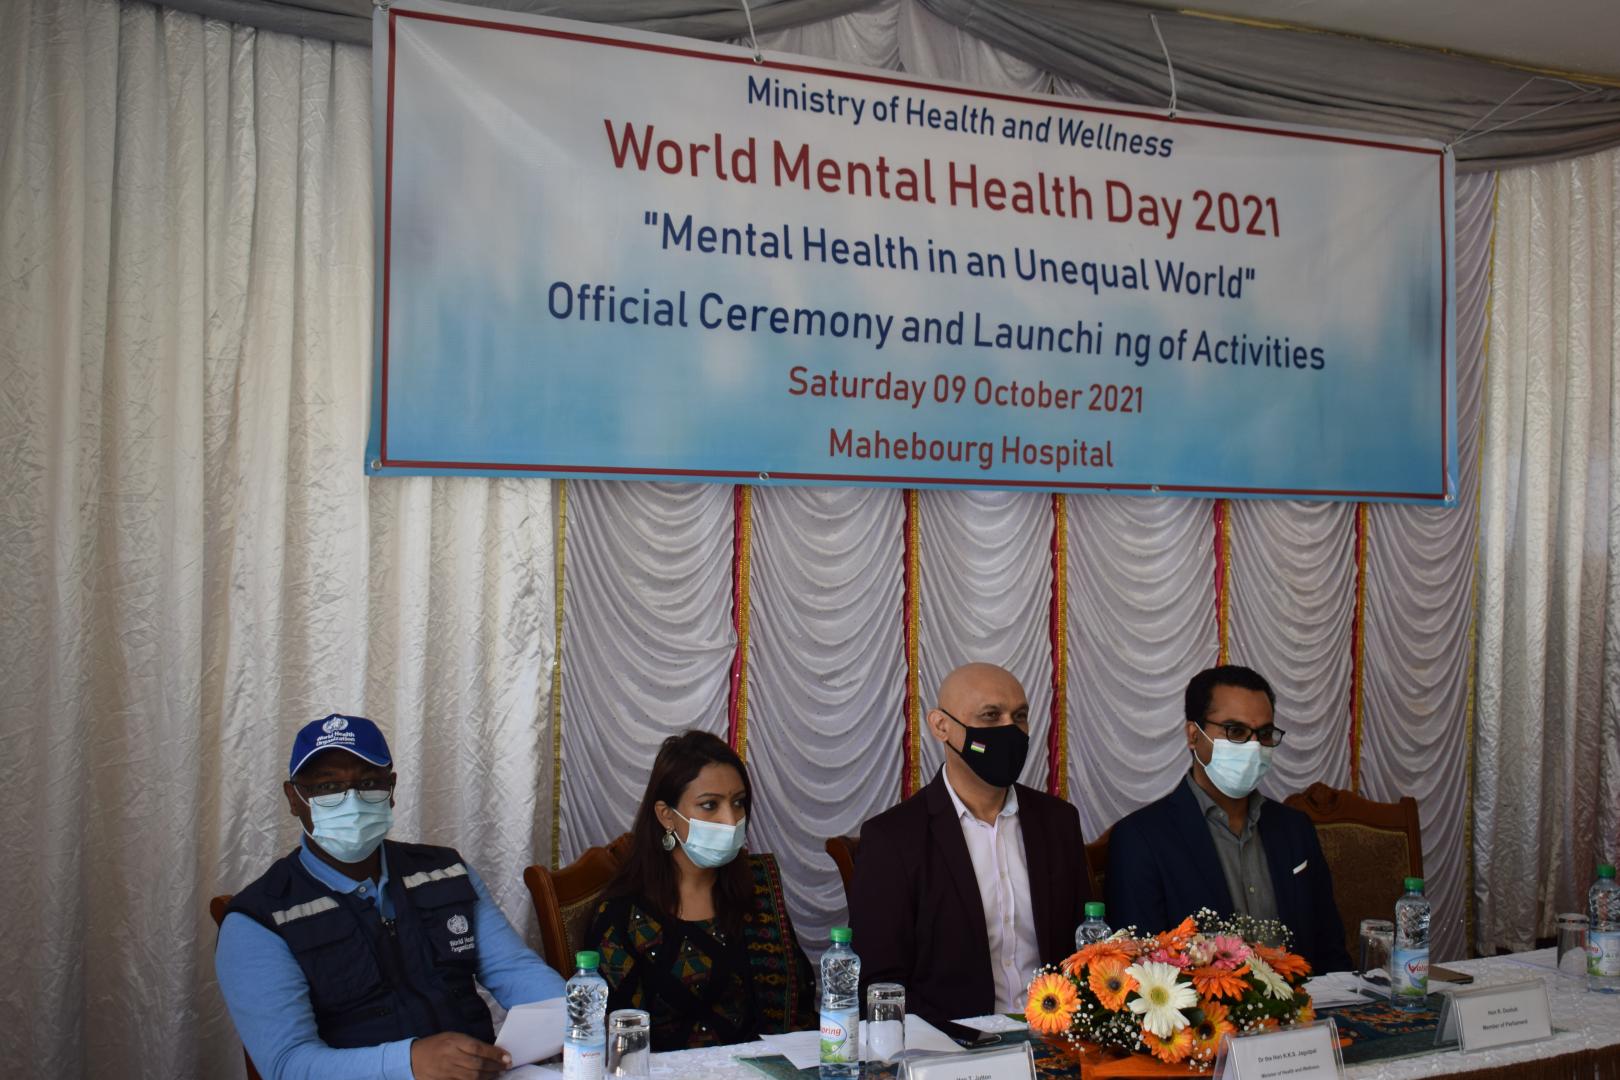 Launching of activities in the context of the World Mental Health Day 2021, Mauritius 